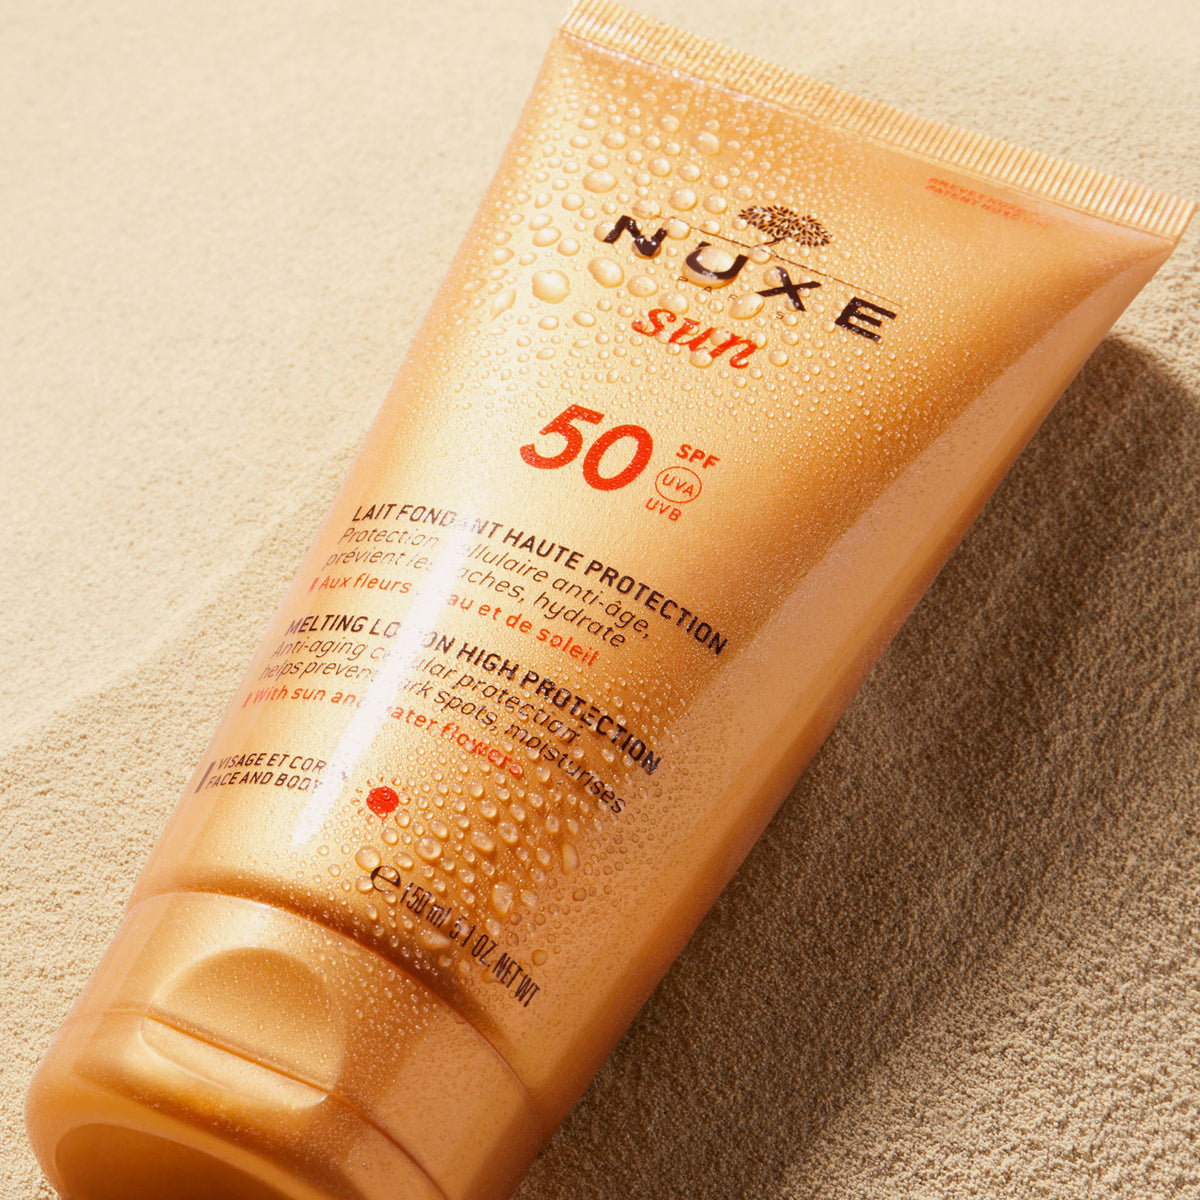 NUXE | Sun Melting Lotion High Protection SPF 50